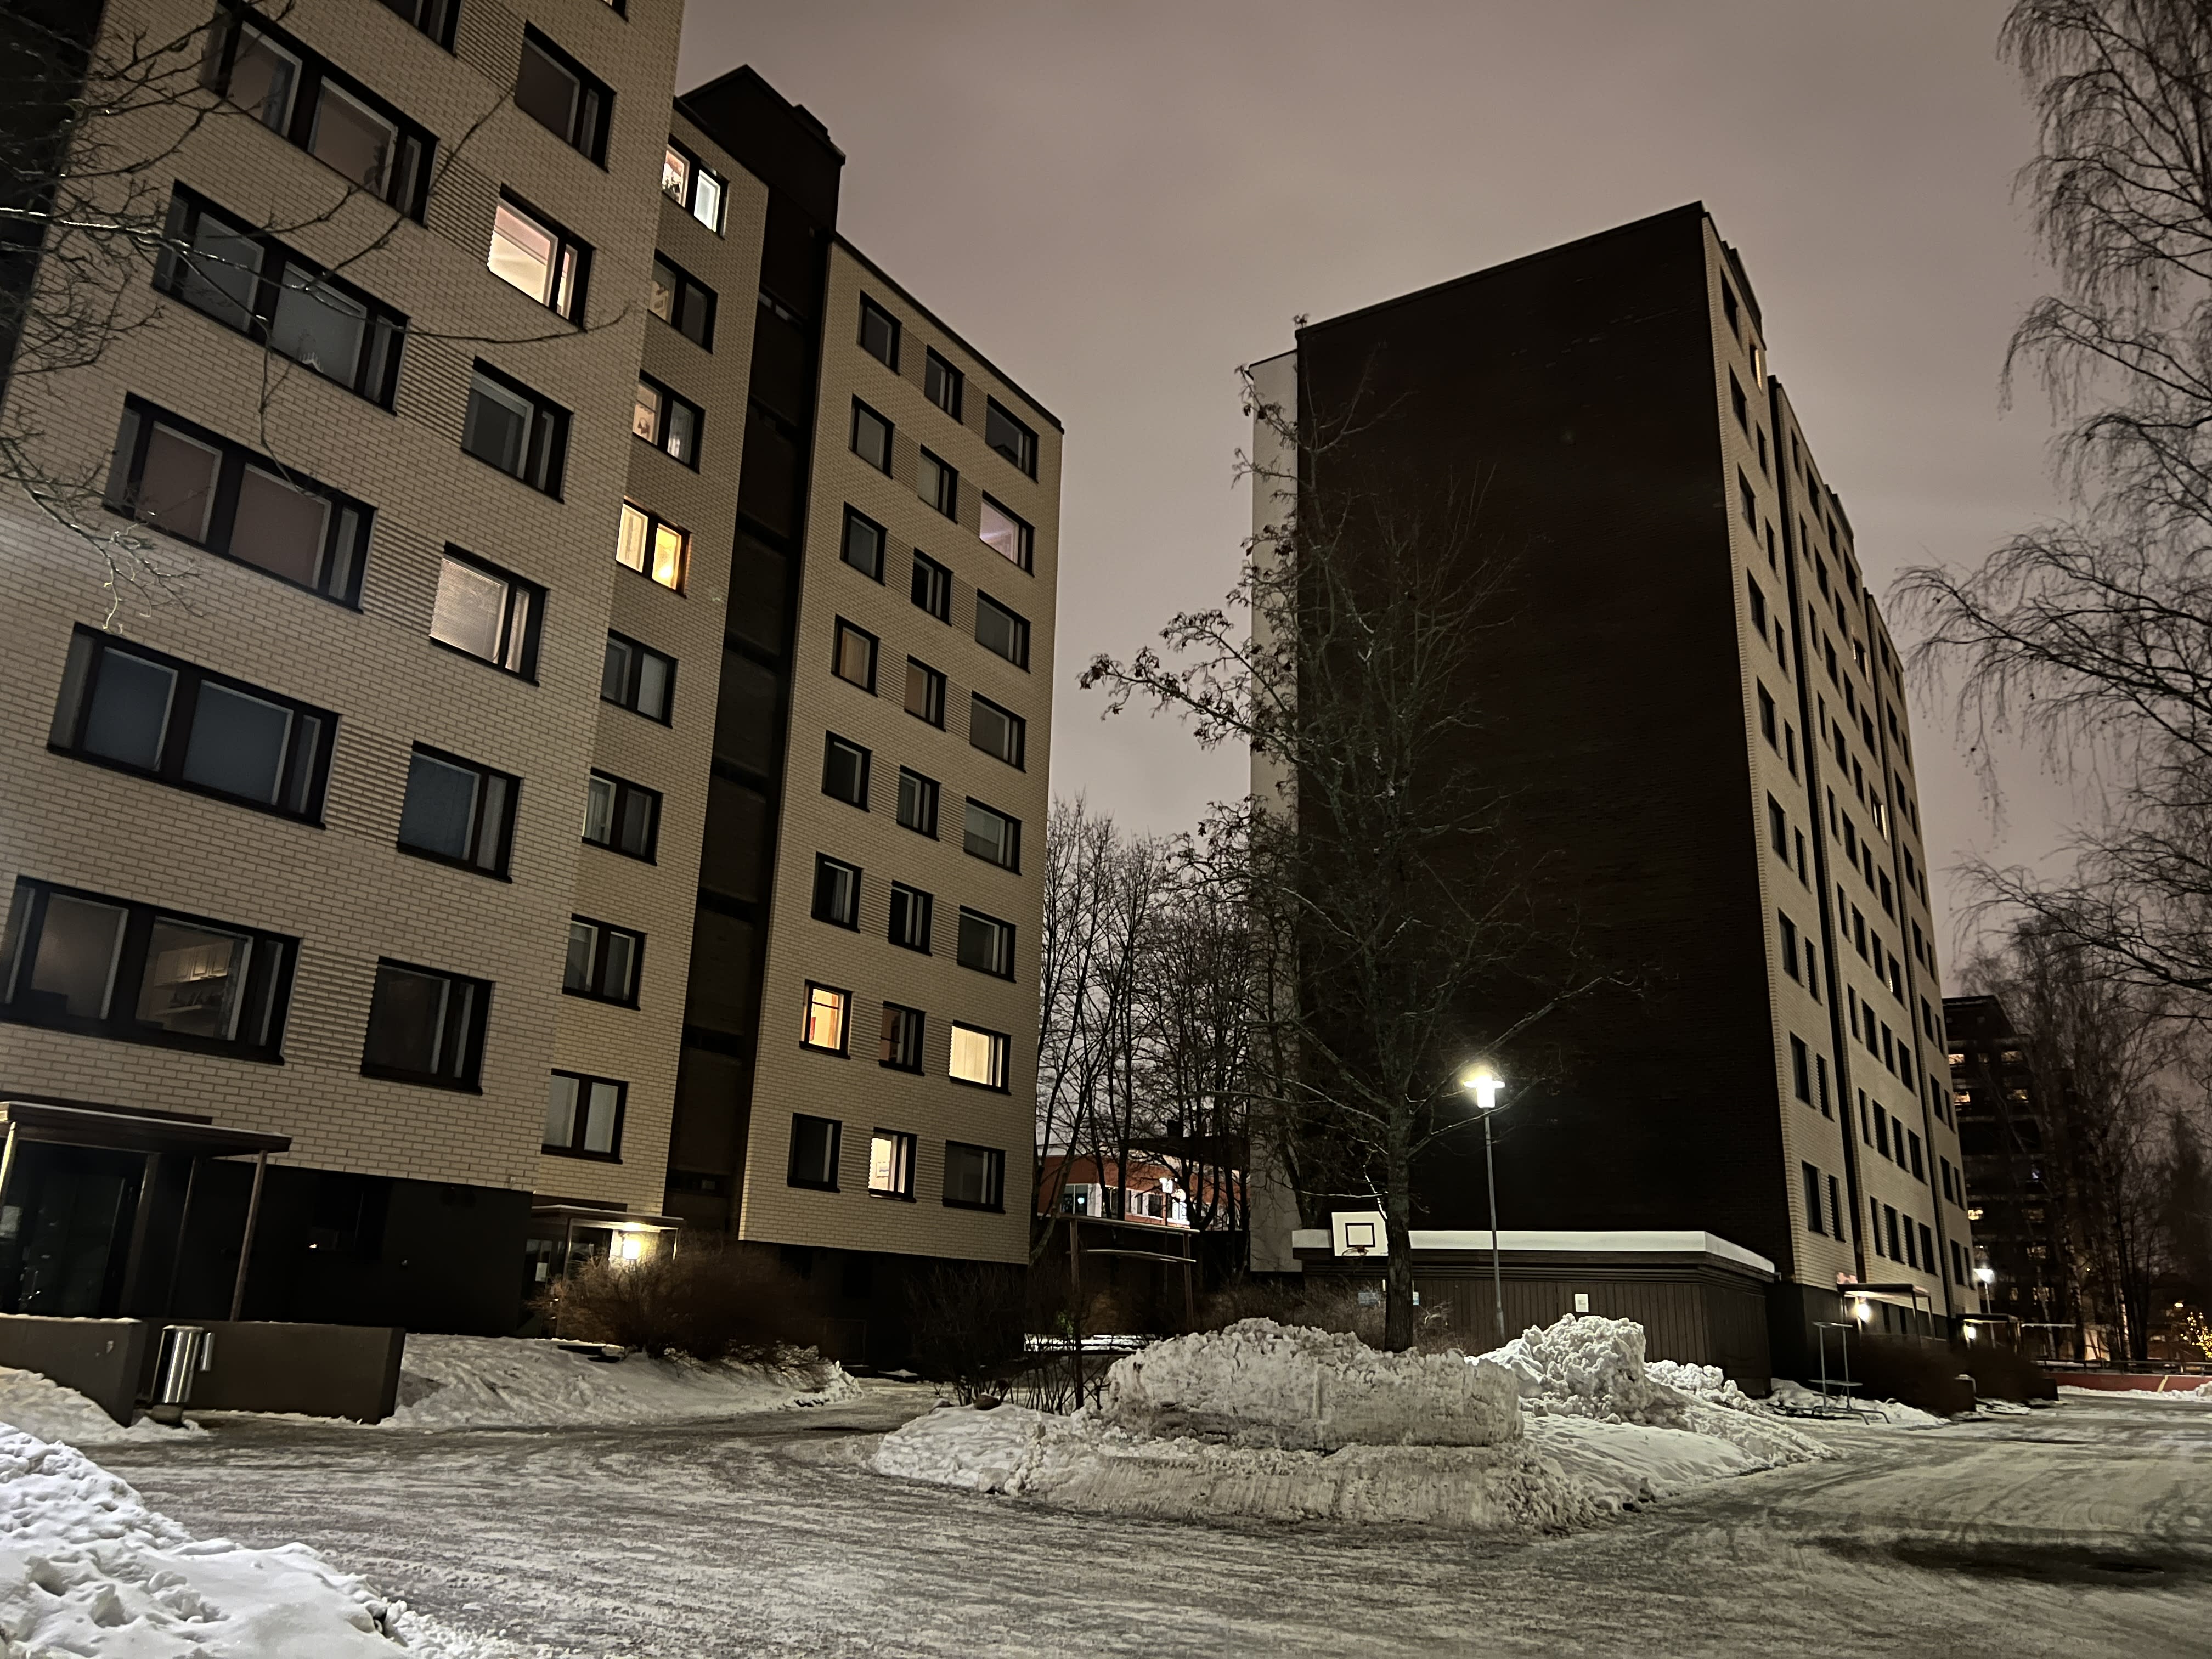 The murder of a postal worker in Vantaa remains unsolved after a year